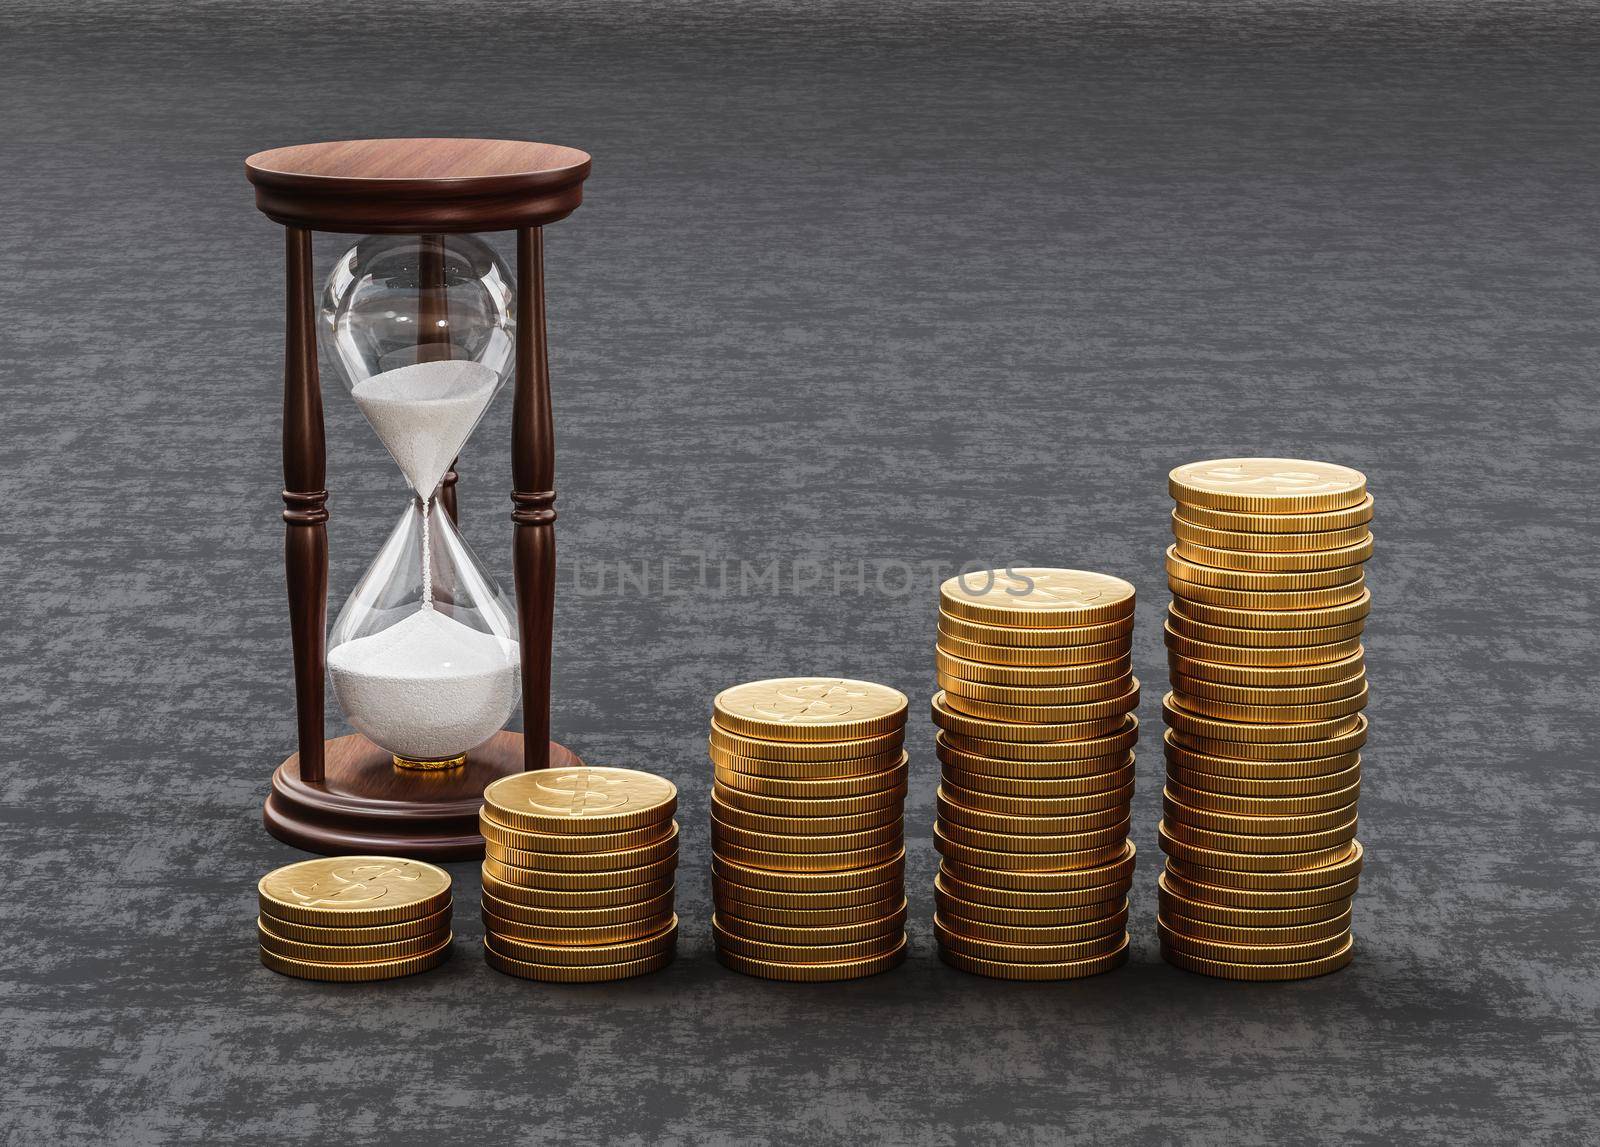 Rising Heaps of Coins on Dark Background with Hourglass by make